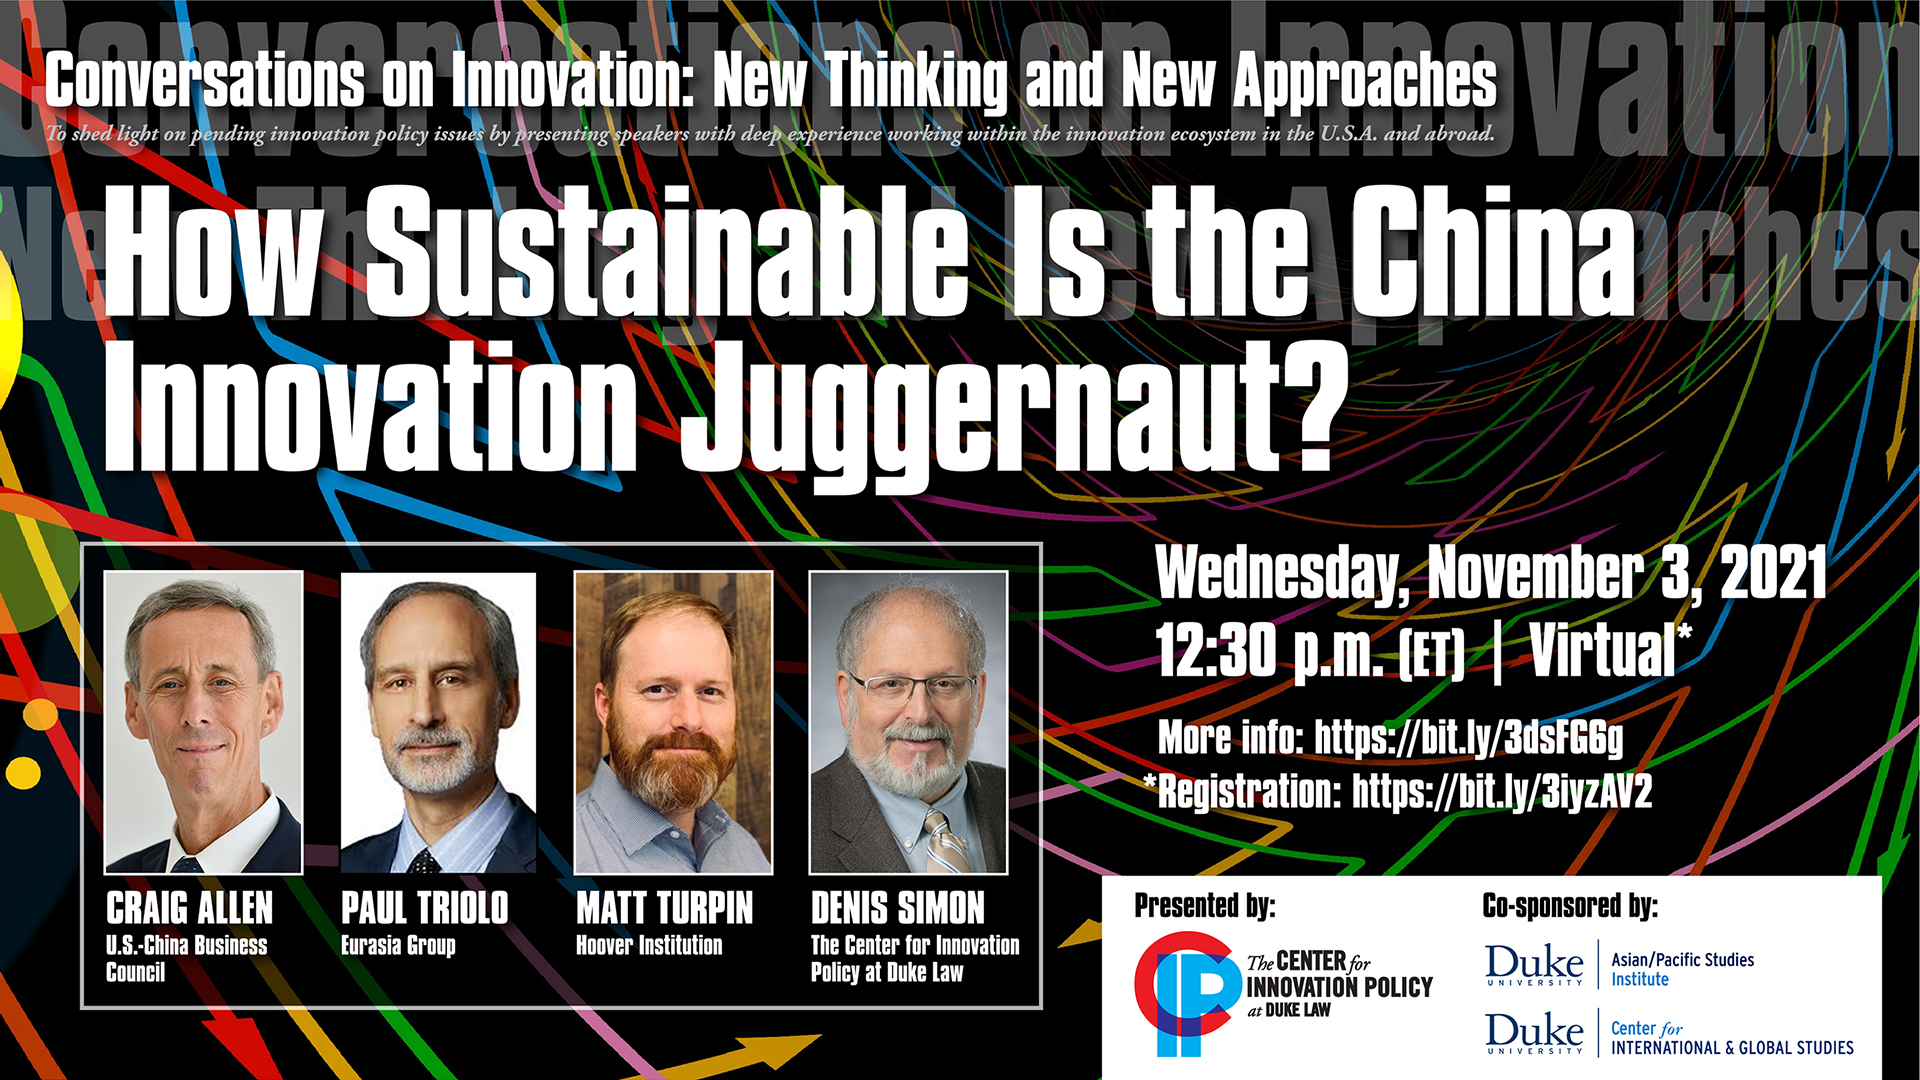 Conversations on Innovation: How Sustainable Is the China Innovation Juggernaut? with Craig Allen, Paul Triolo, Matt Turpin, and Denis Simon, November 3, 2021